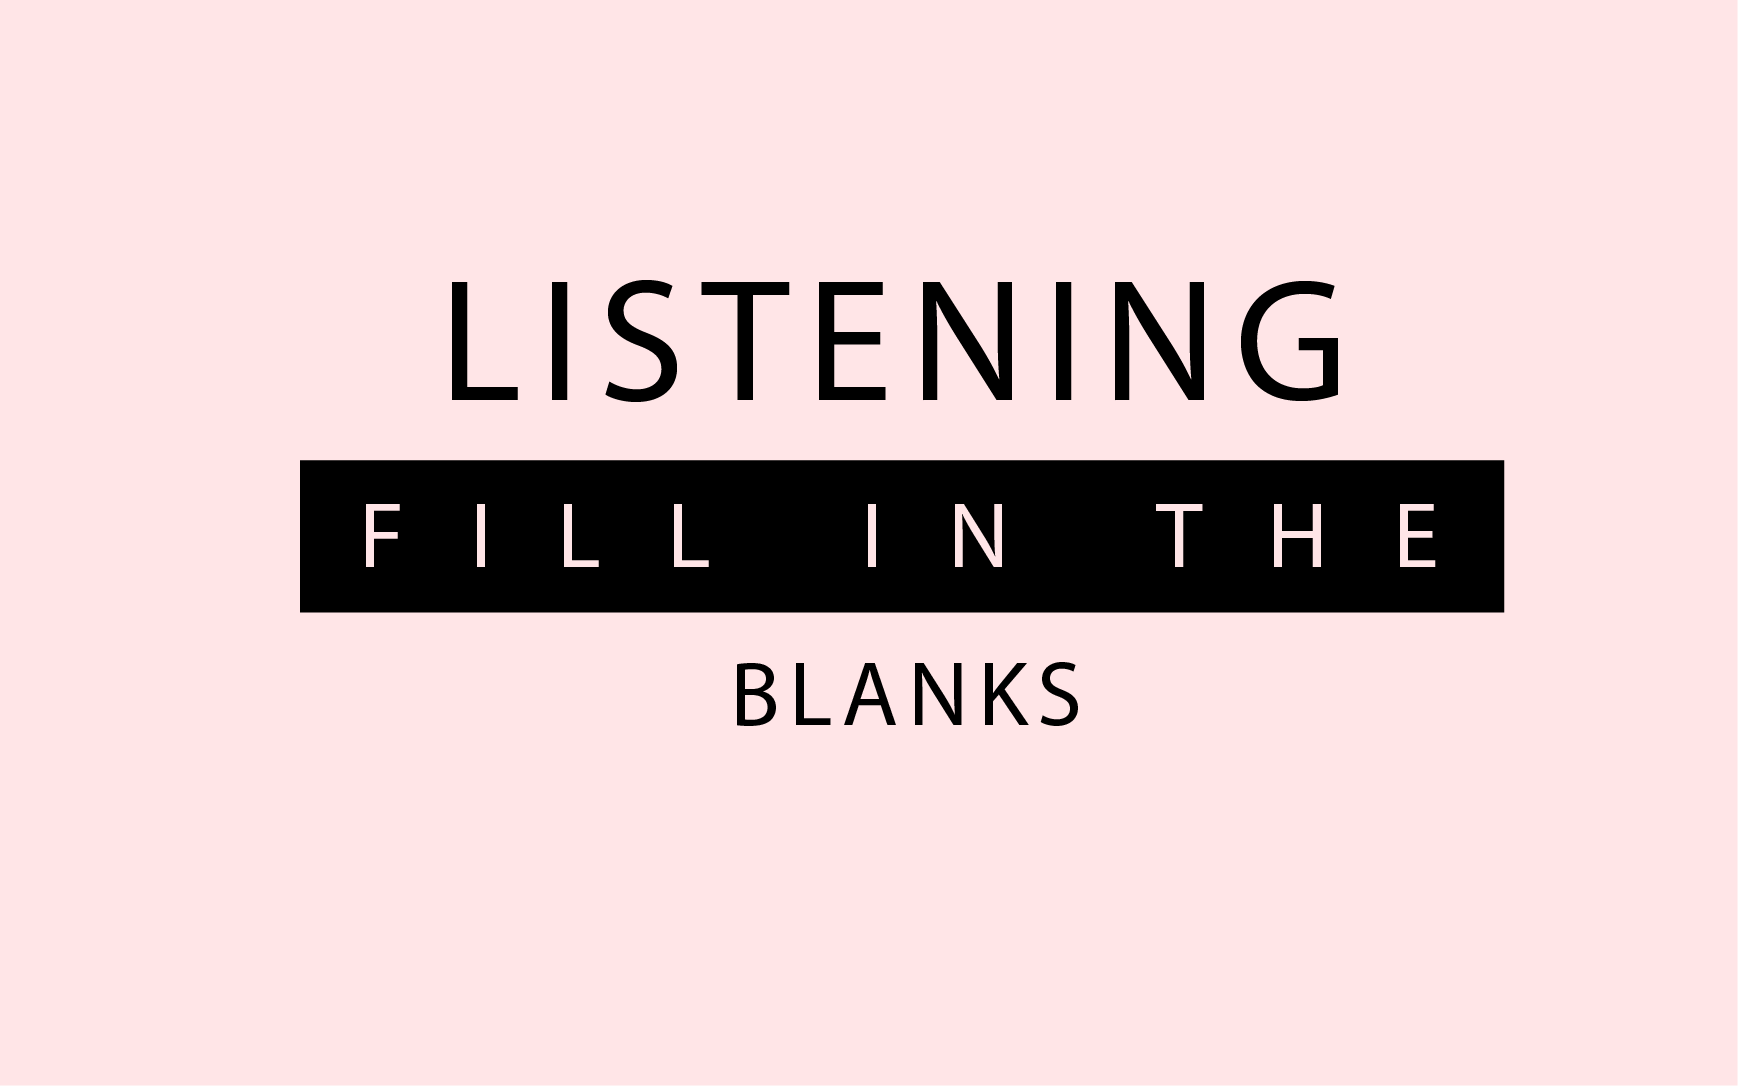 pte-fill-in-the-blanks-listening-practice-exam-question-bank-2022